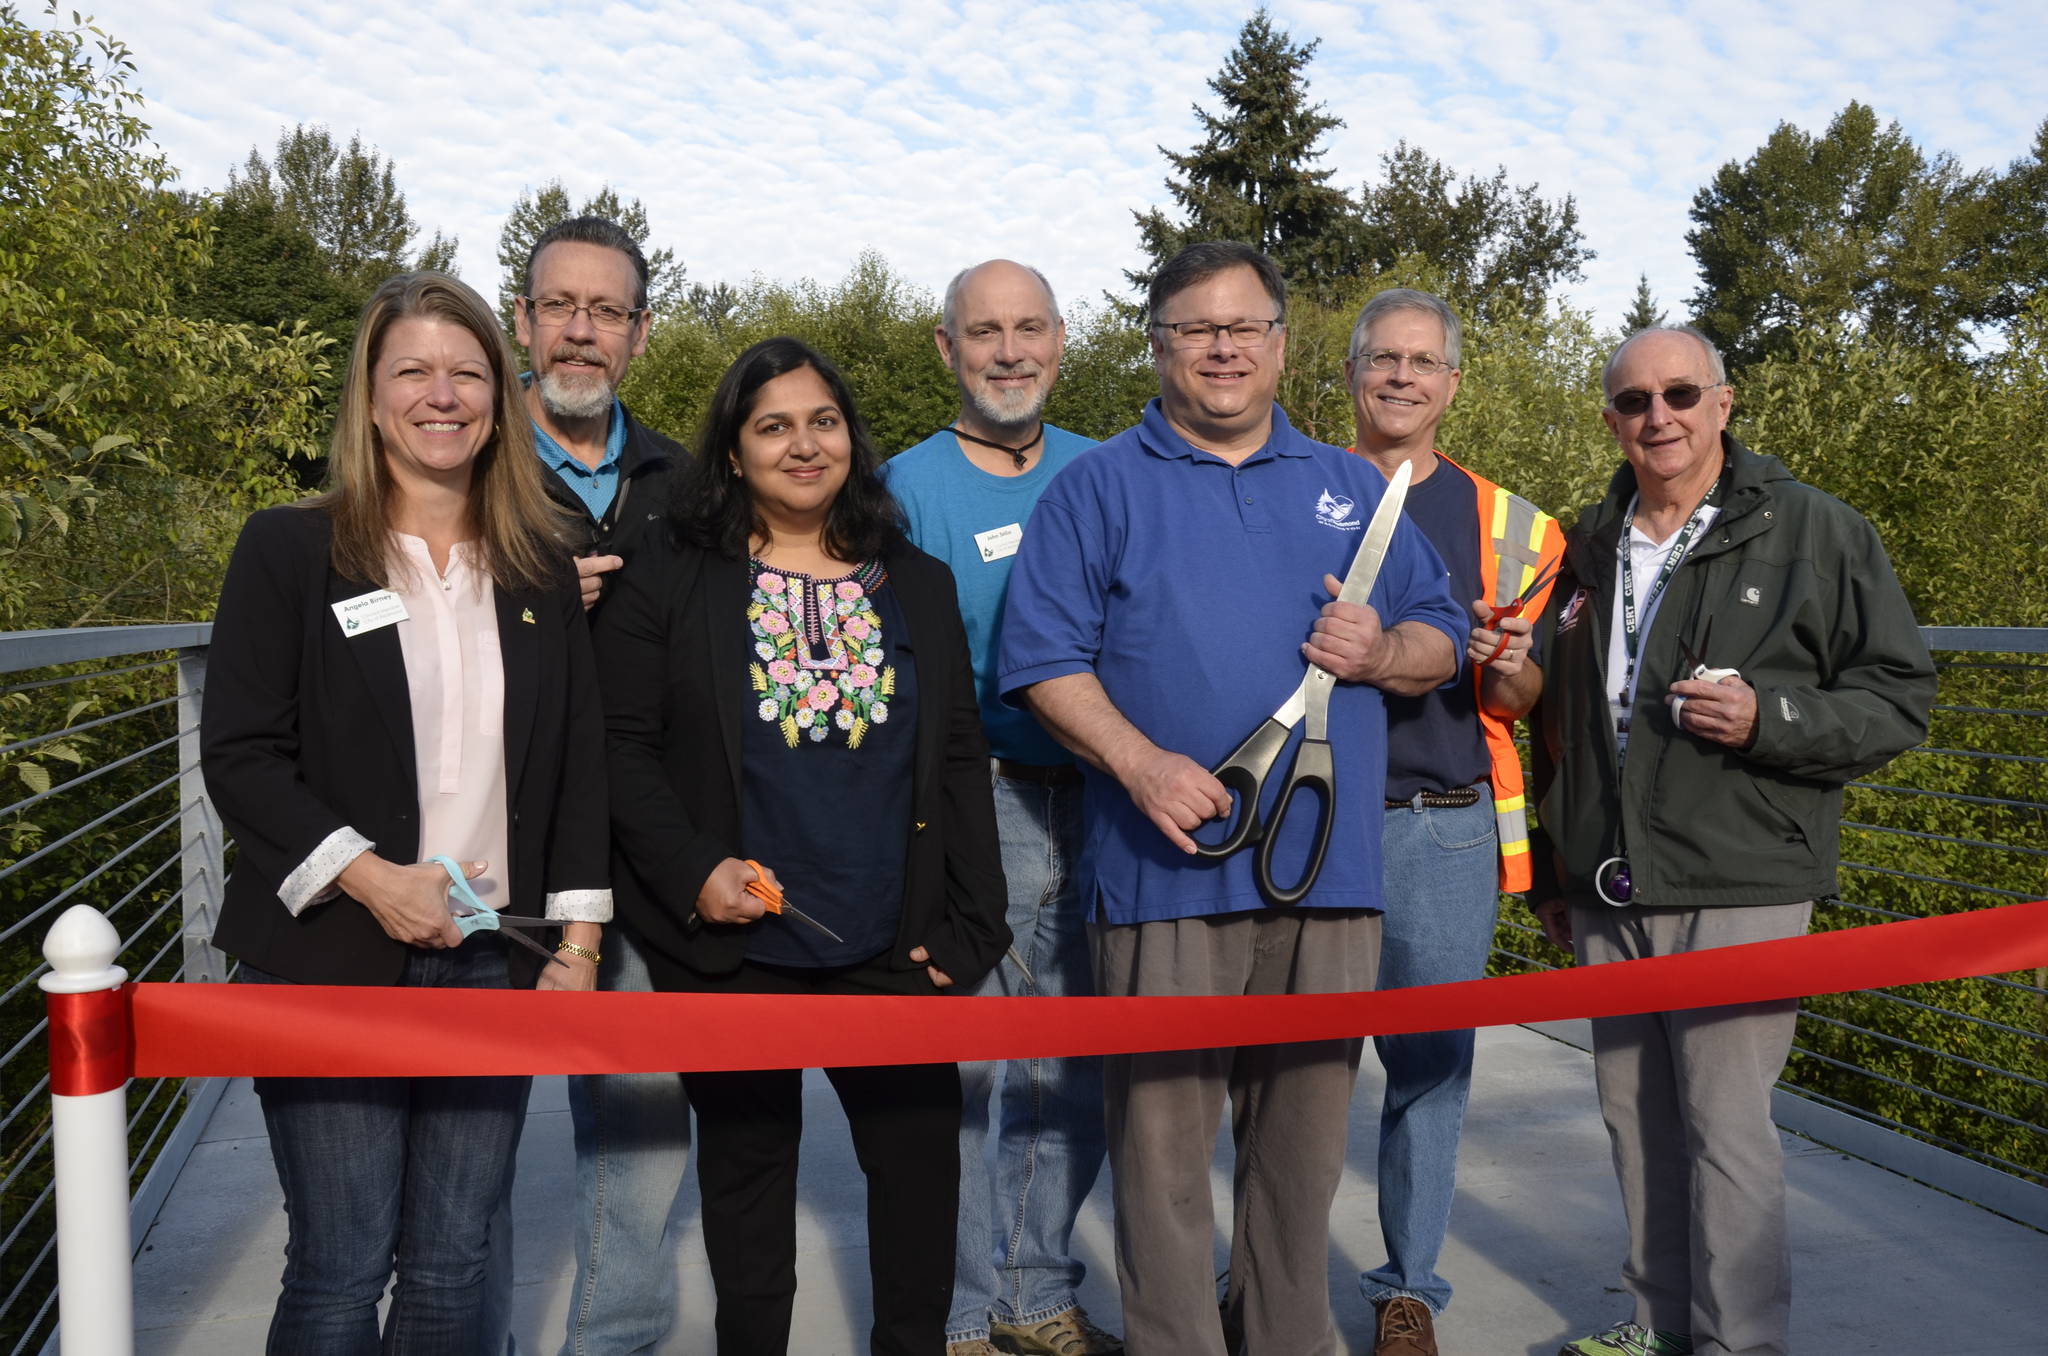 From left to right at the Redmond Central Connector Phase II opening: Redmond City Council members Angela Birney, Hank Margeson, Tanika Padhye, John Stilin, Mayor John Marchione, and city council members Byron Shutz and Hank Myers. Not pictured: City council member David Carson. At right, an artist’s rendering of a portion of the connector. Courtesy photo and graphic